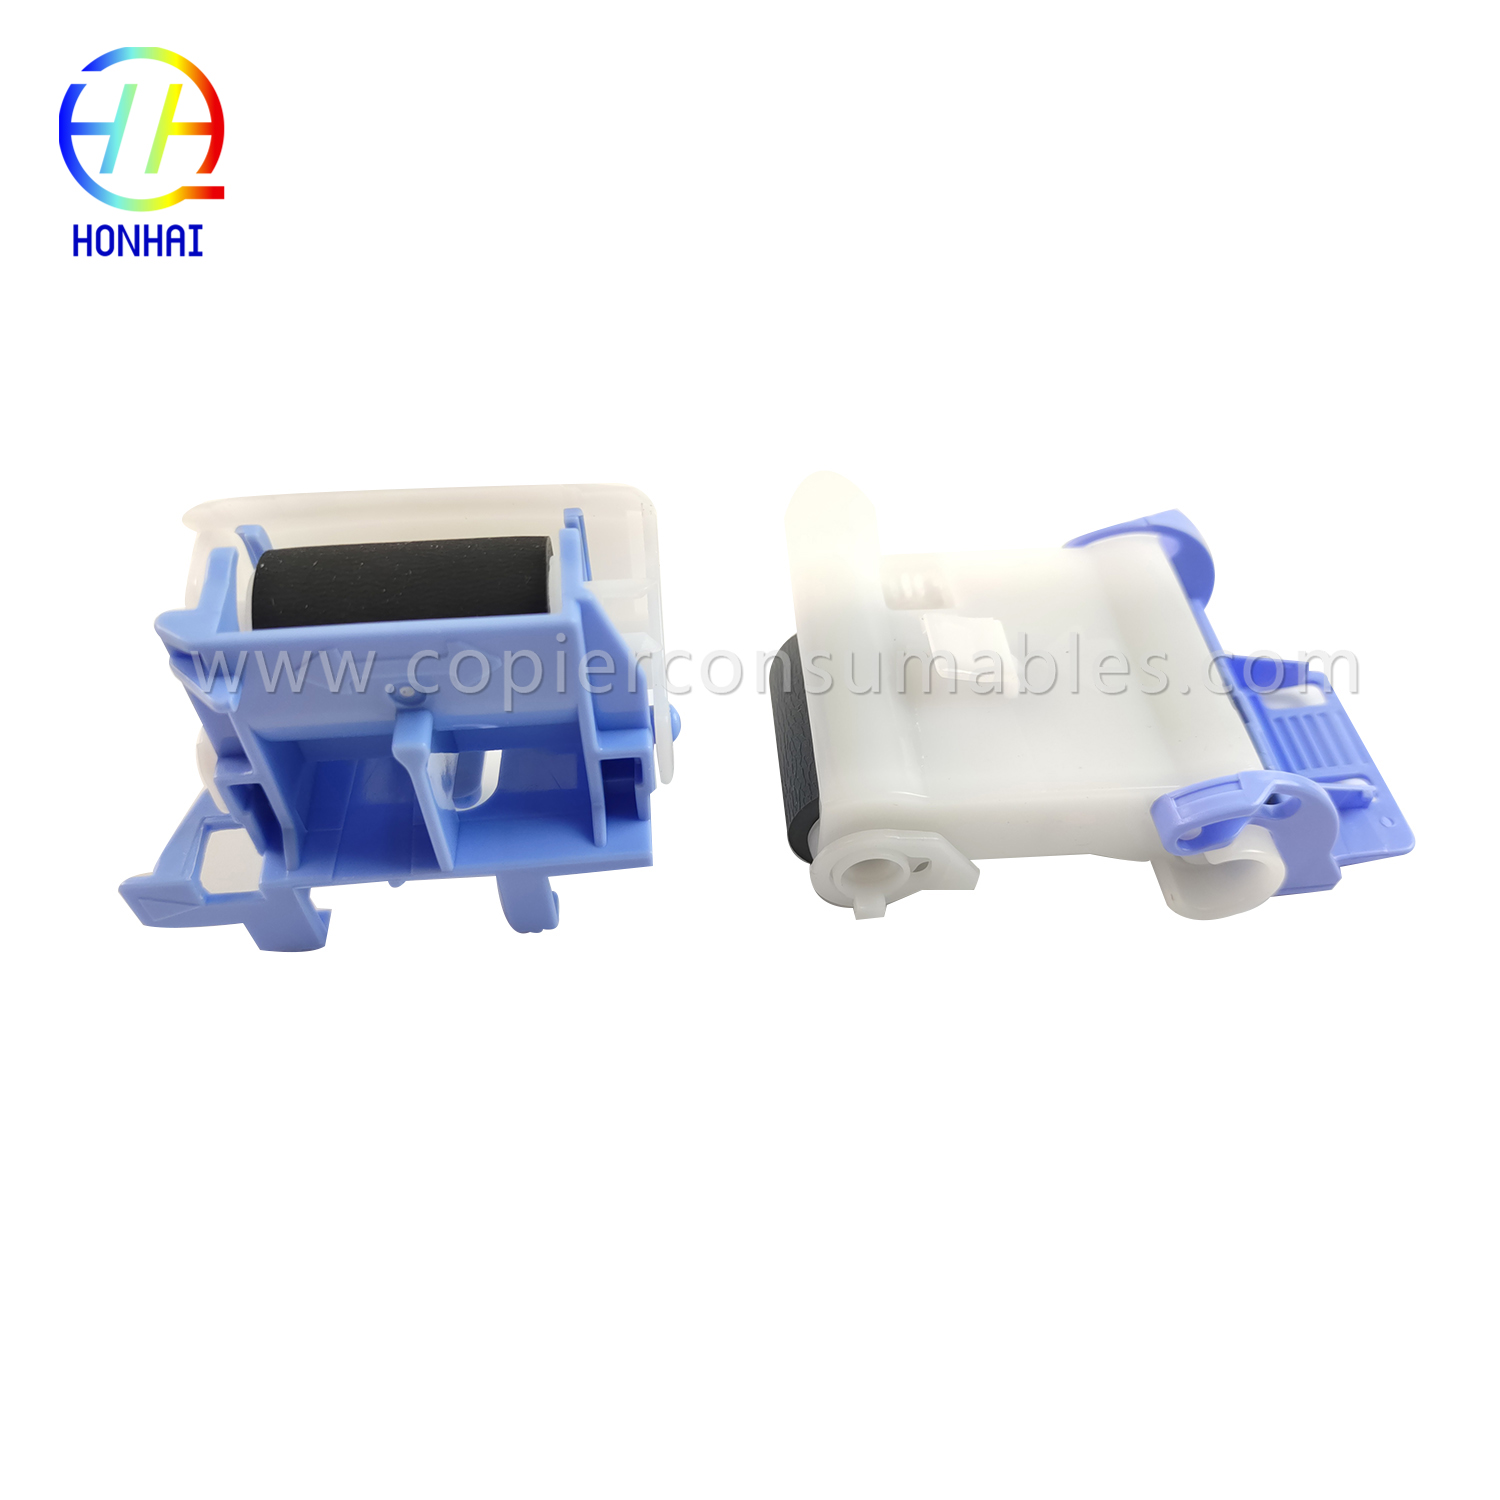 Separation & Pickup Feed Assemblies, Tray 2 for HP Laserjet Enterprise M607, Laserjet Enterprise M608, M609, M631, M632, M633 J8J70-67904 （1） (5) 拷贝